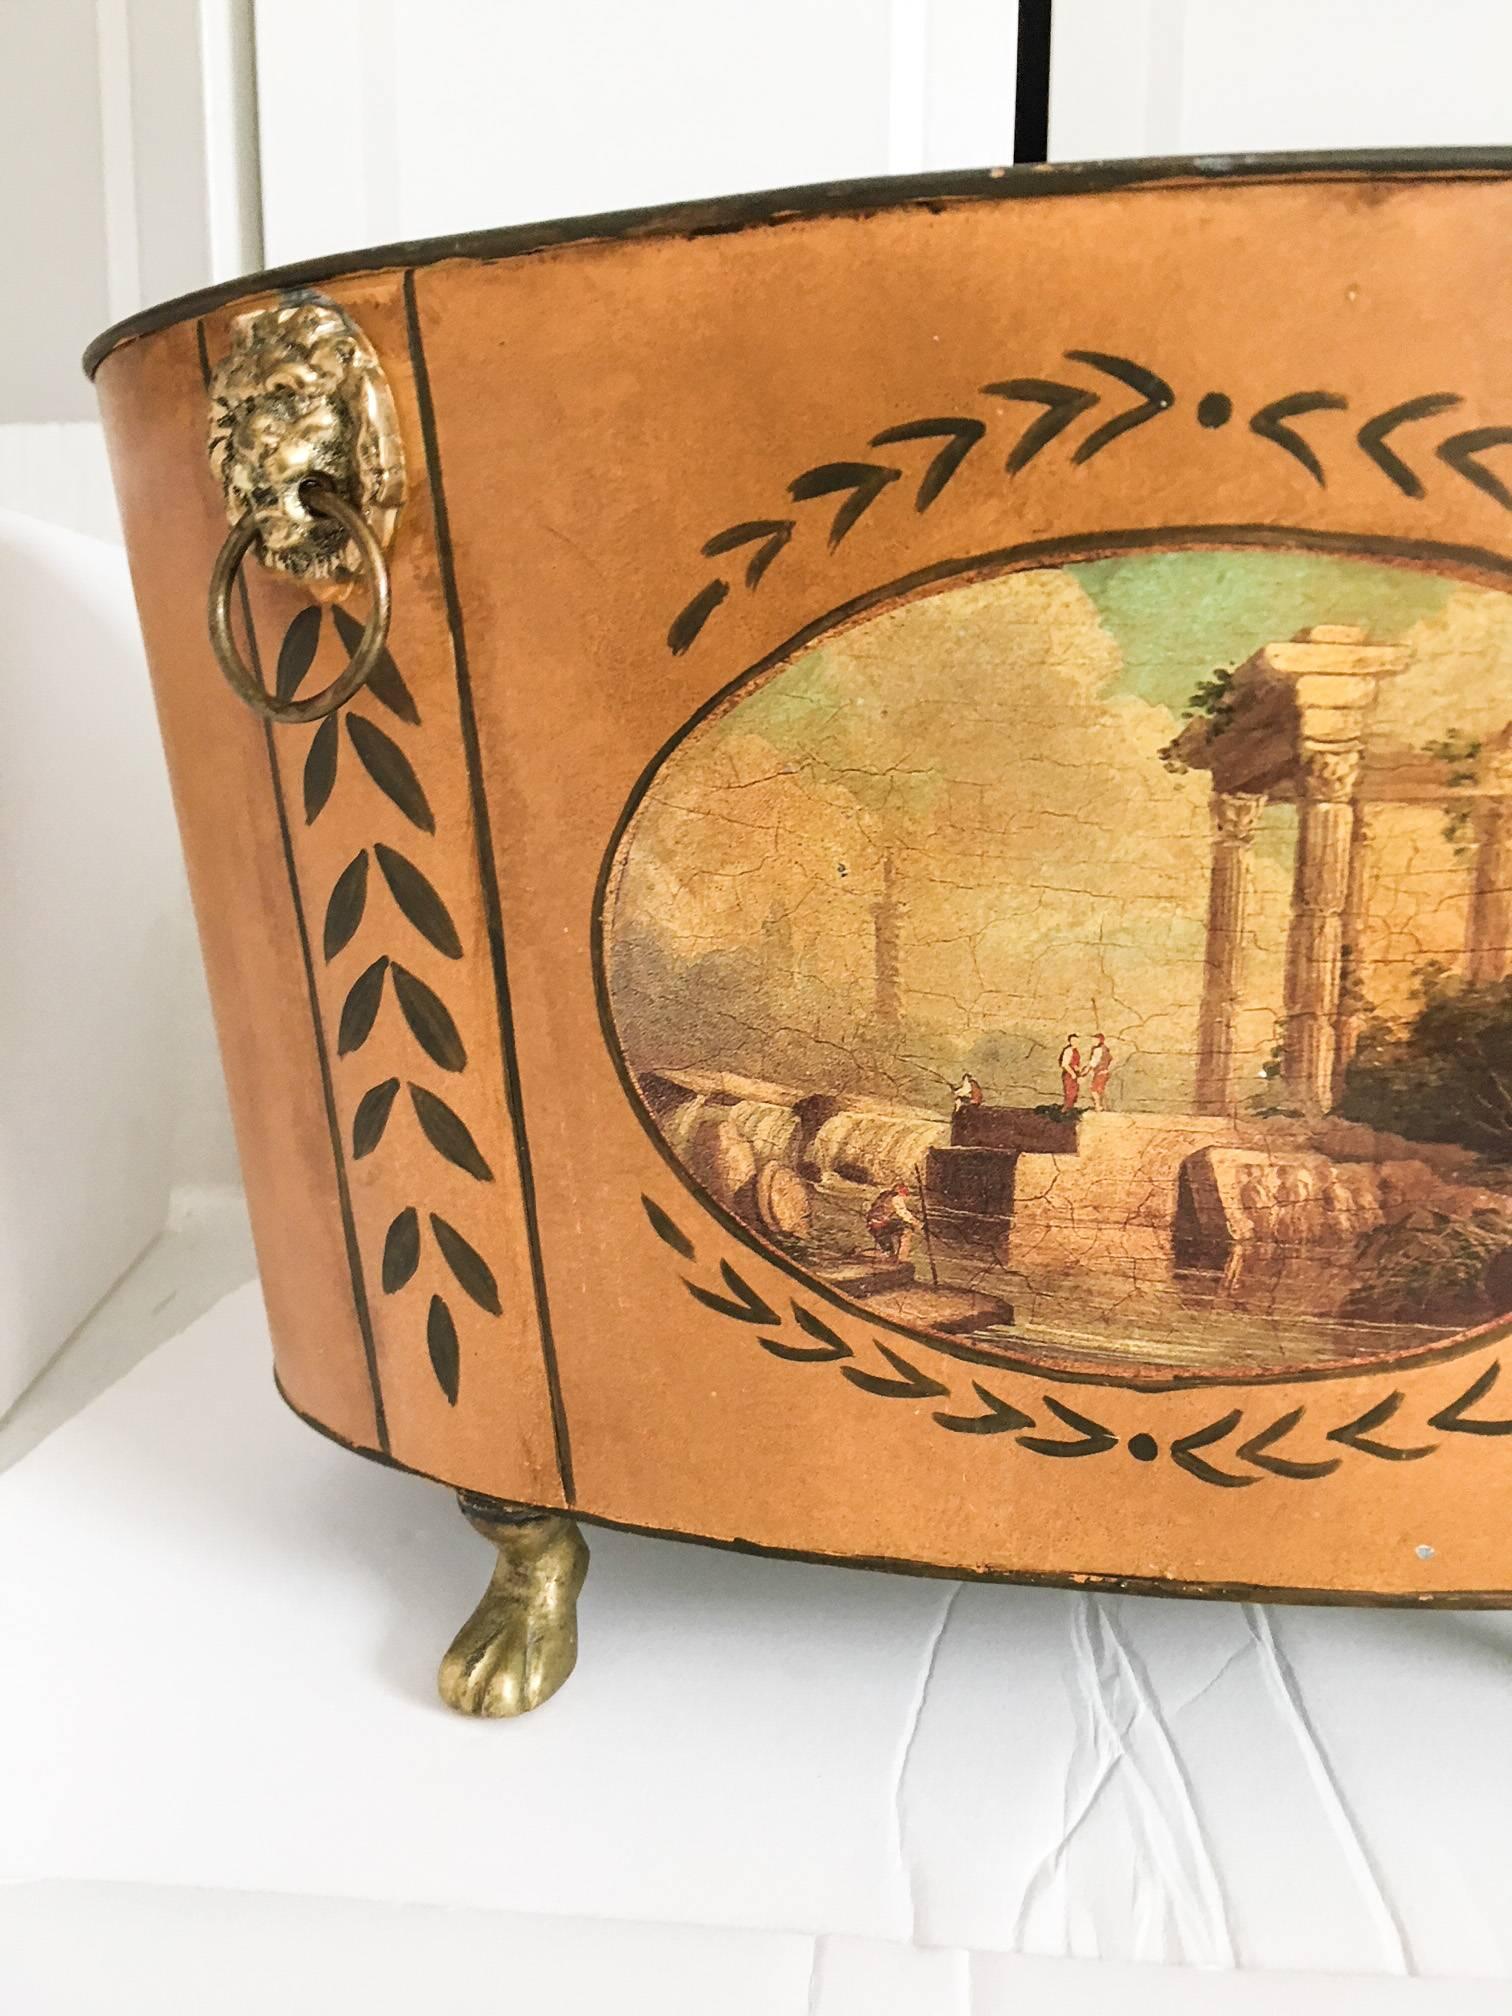 Wonderful butterscotch yellow tole painted metal oval cachepot decorated with brass lions head doorknocker-style handles and hoofed brass feet. Both sides have a decoupage paper Italianate scene; one scene has a small chip at the bottom corner as